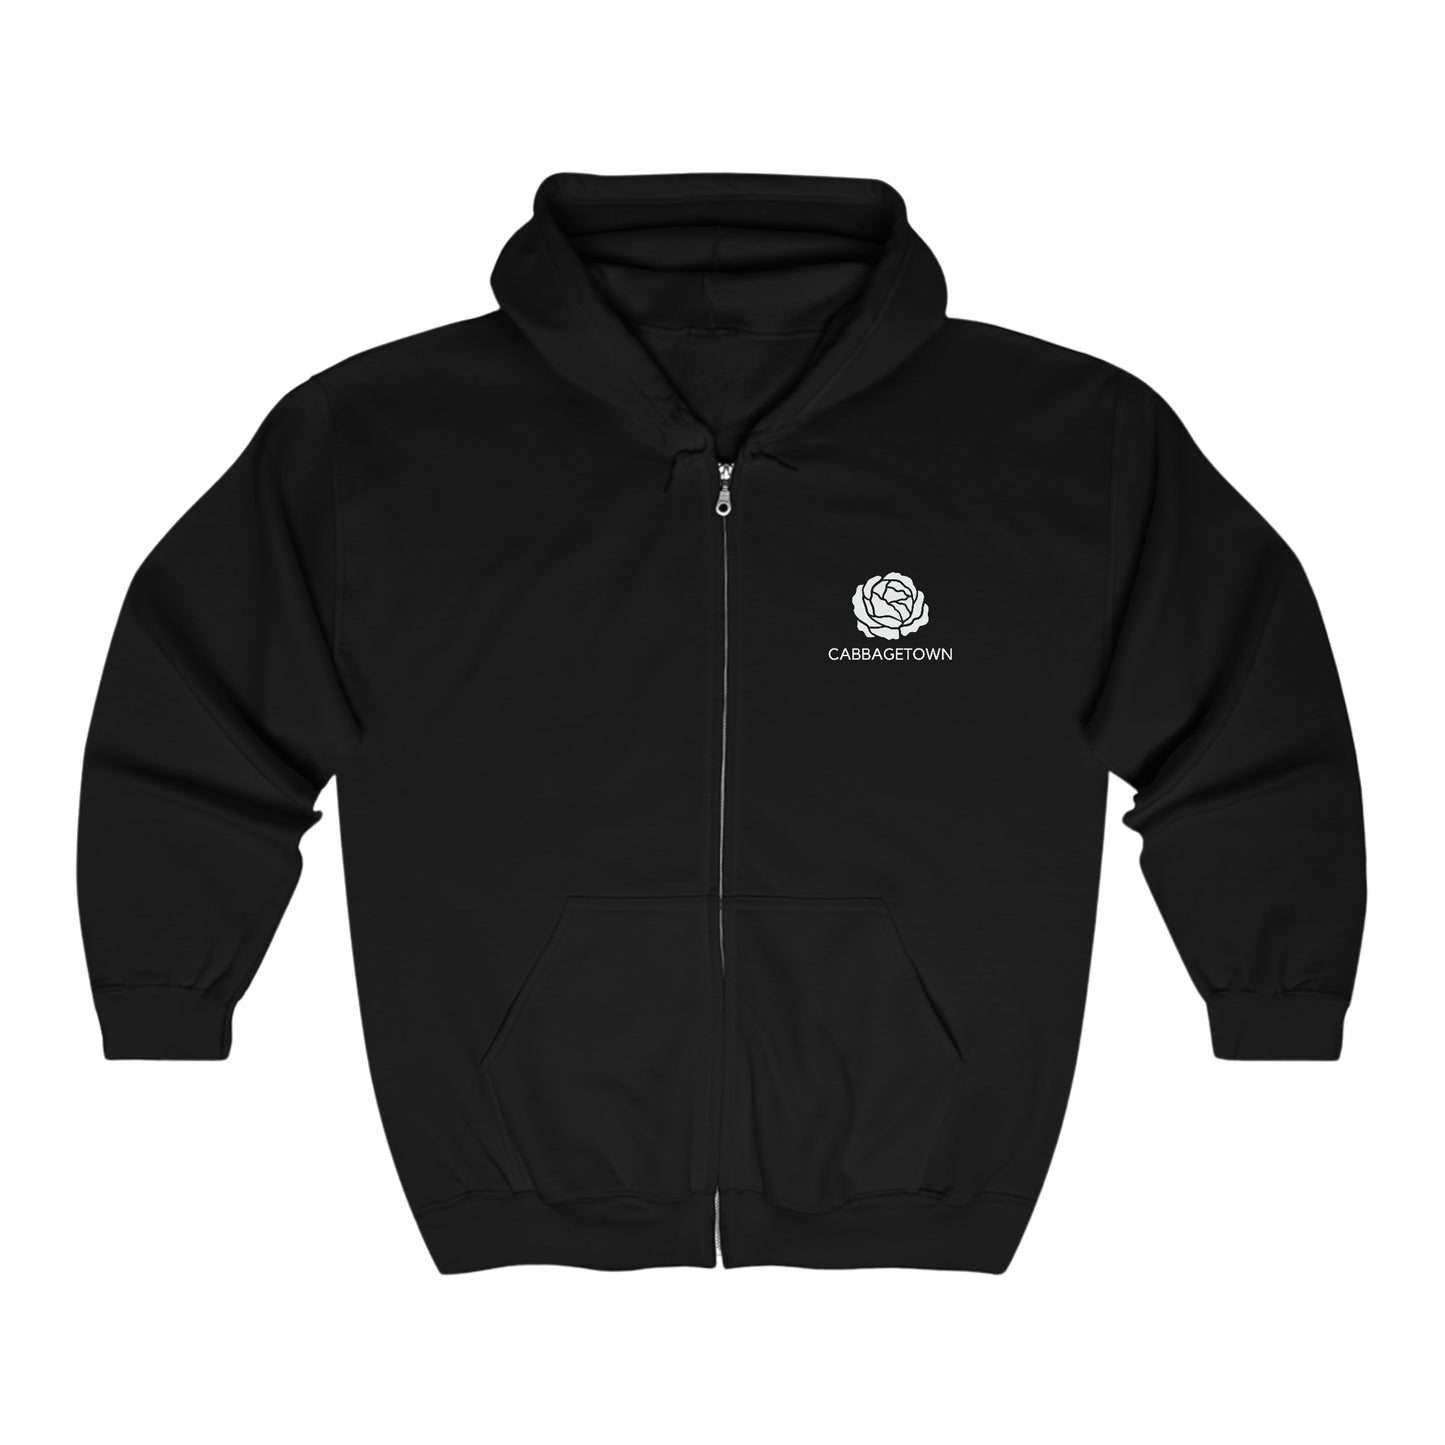 Black zip-up hoodie with a white Toronto logo reading "Cabbagetown" and a rose design on the left chest area, featuring a drawstring hood and front pockets made by Printify's Unisex Heavy Blend™ Full Zip Hooded Sweatshirt.